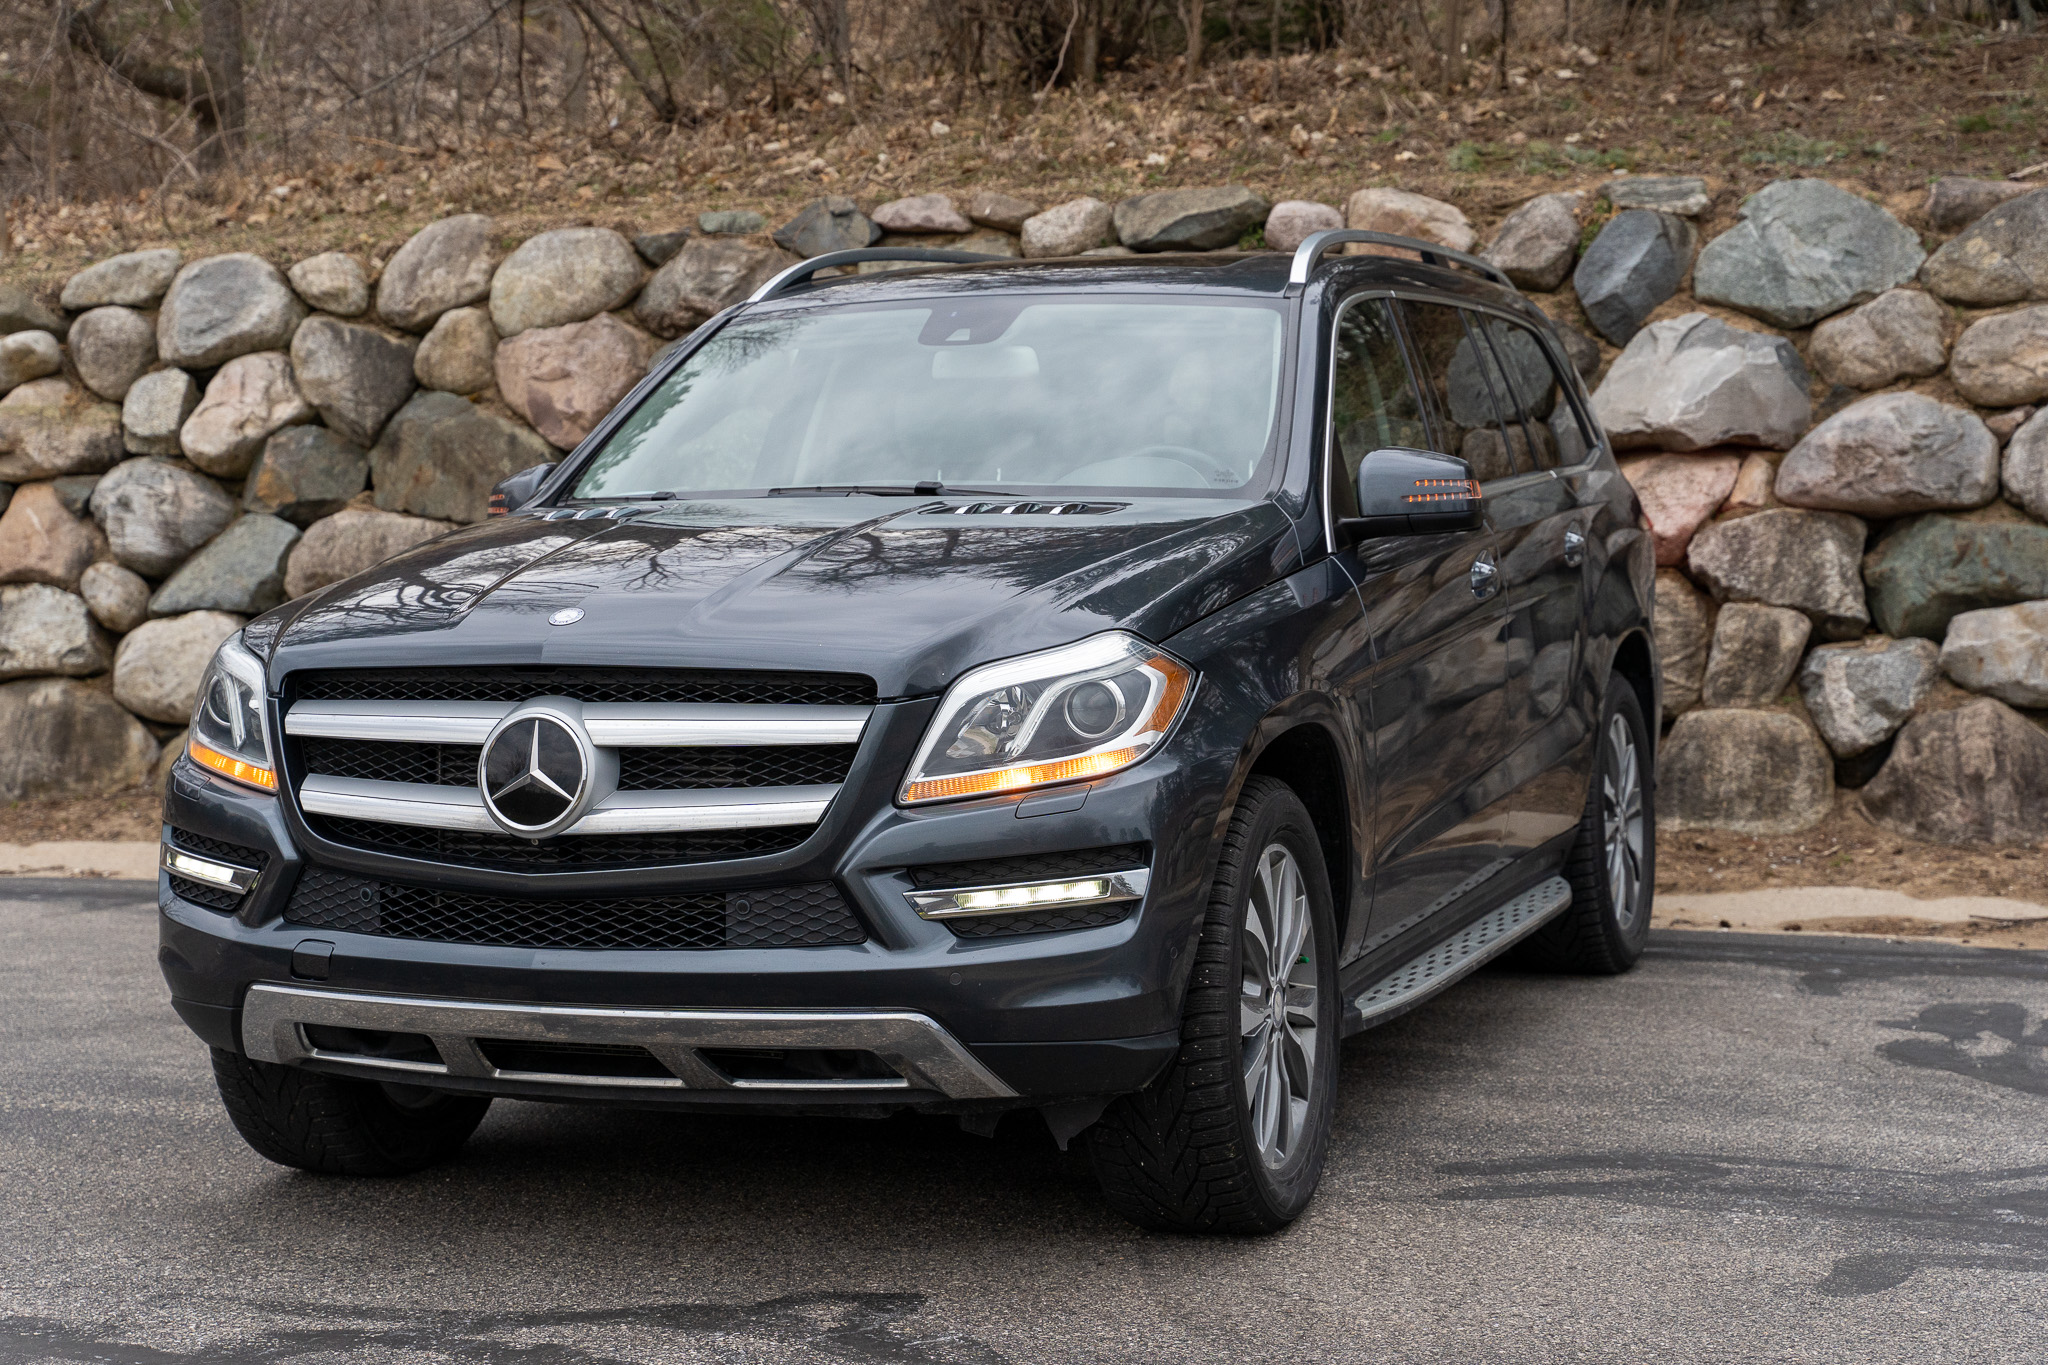 Used Mercedes-benz Gl-class for Sale Near Me | Cars.com